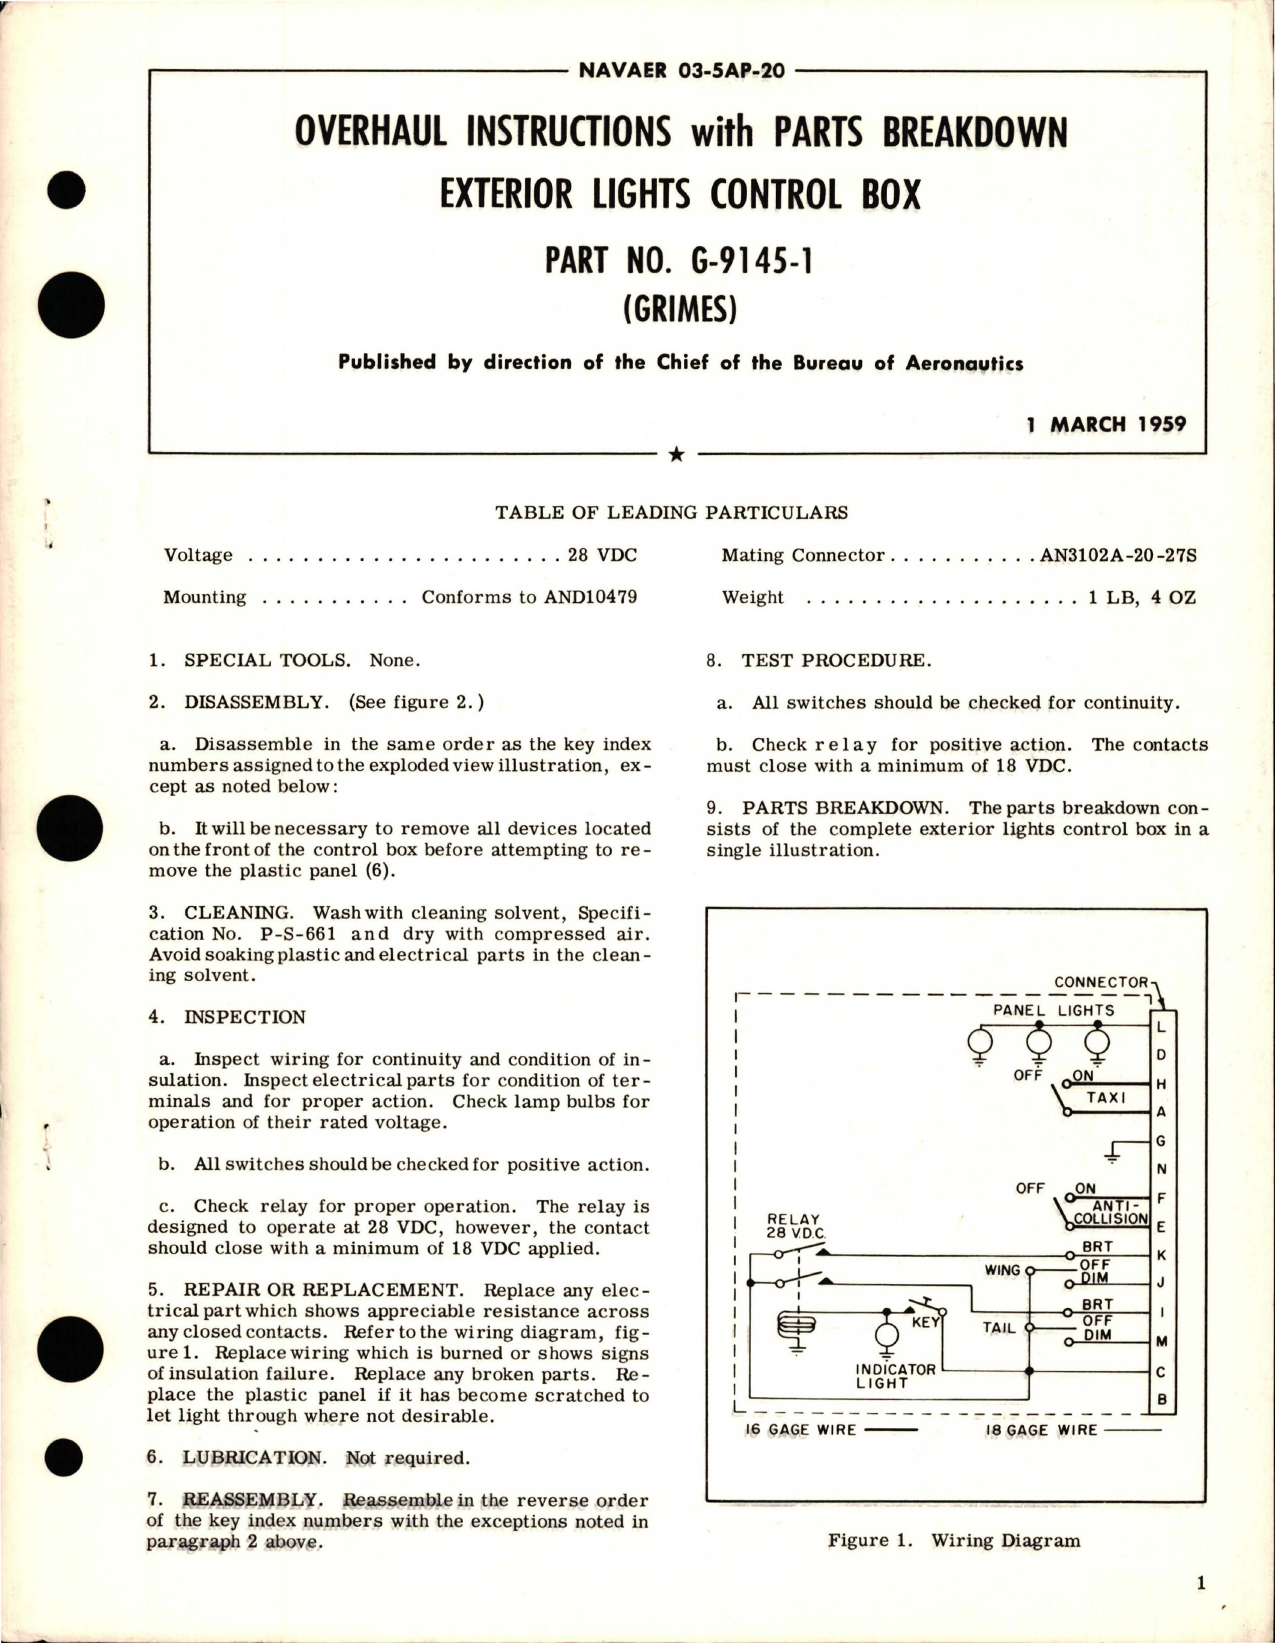 Sample page 1 from AirCorps Library document: Overhaul Instructions with Parts for Exterior Lights Control Box - Part G-9145-1 